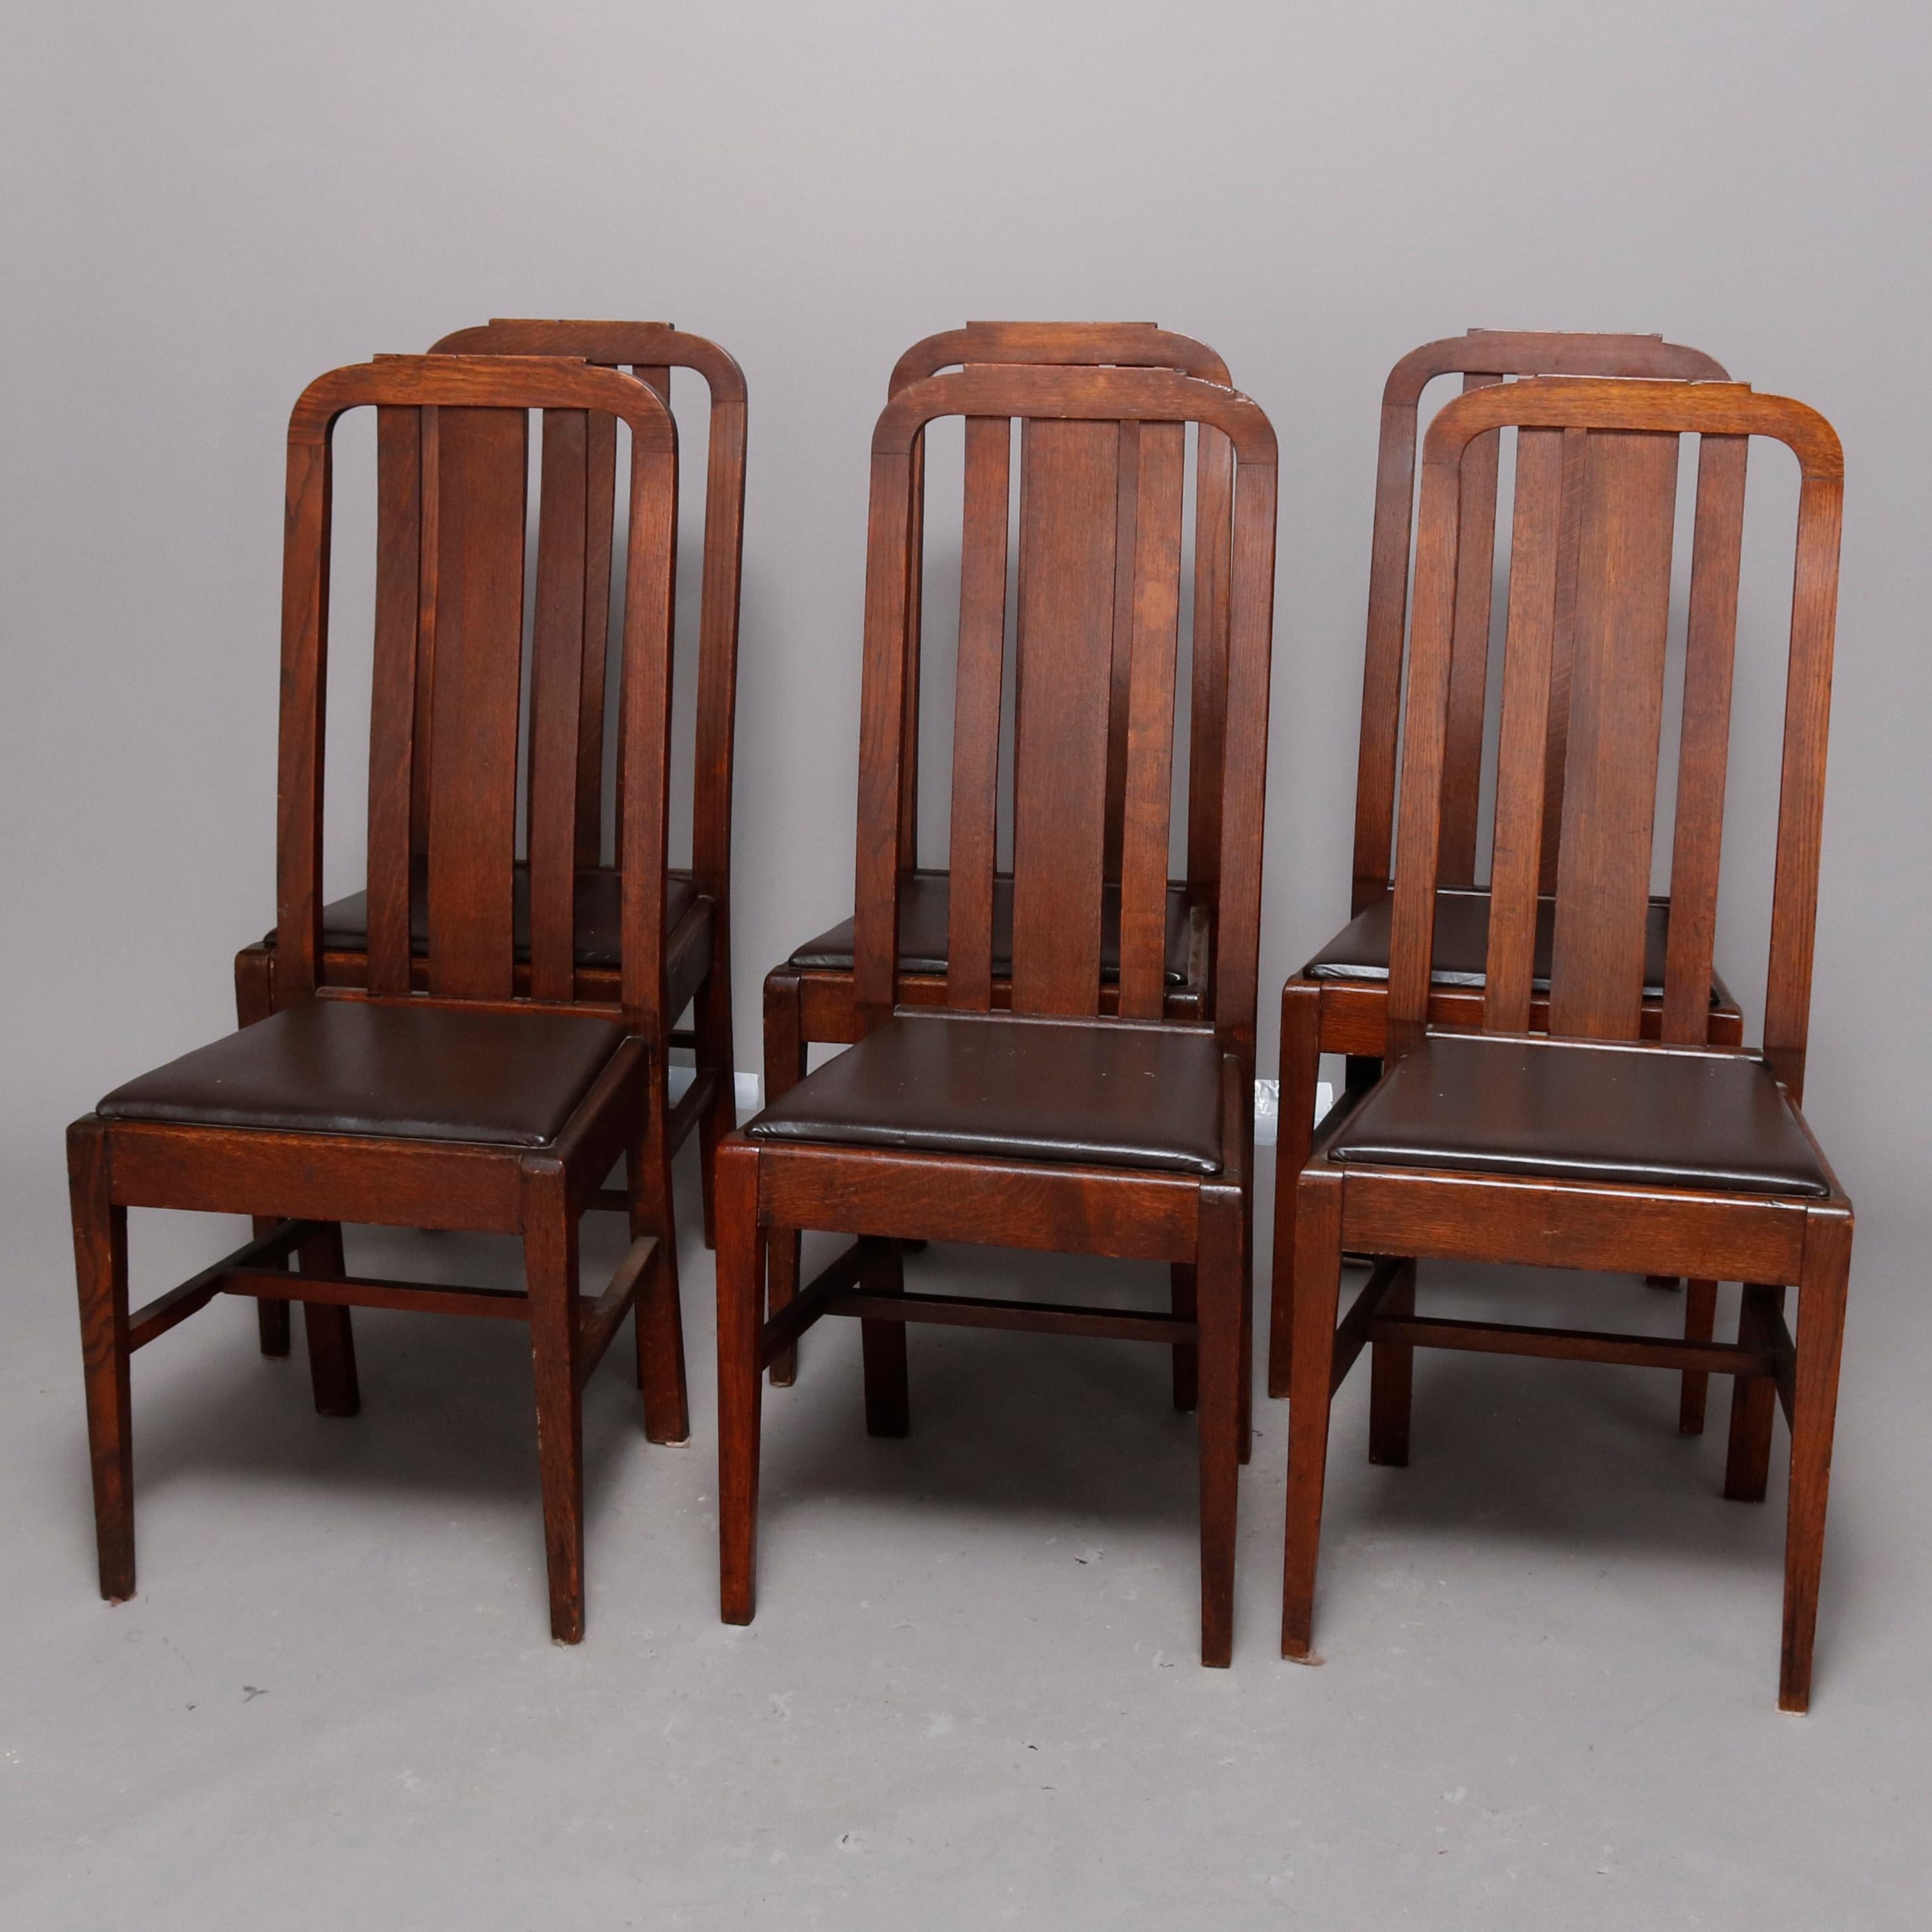 An antique set of Arts & Crafts mission oak dining room chairs by Greenwood Chair Co., Buffalo, New York offer tall and arched slat backs surmounting upholstered seats raised on straight and square legs, circa 1920

Measure: 41